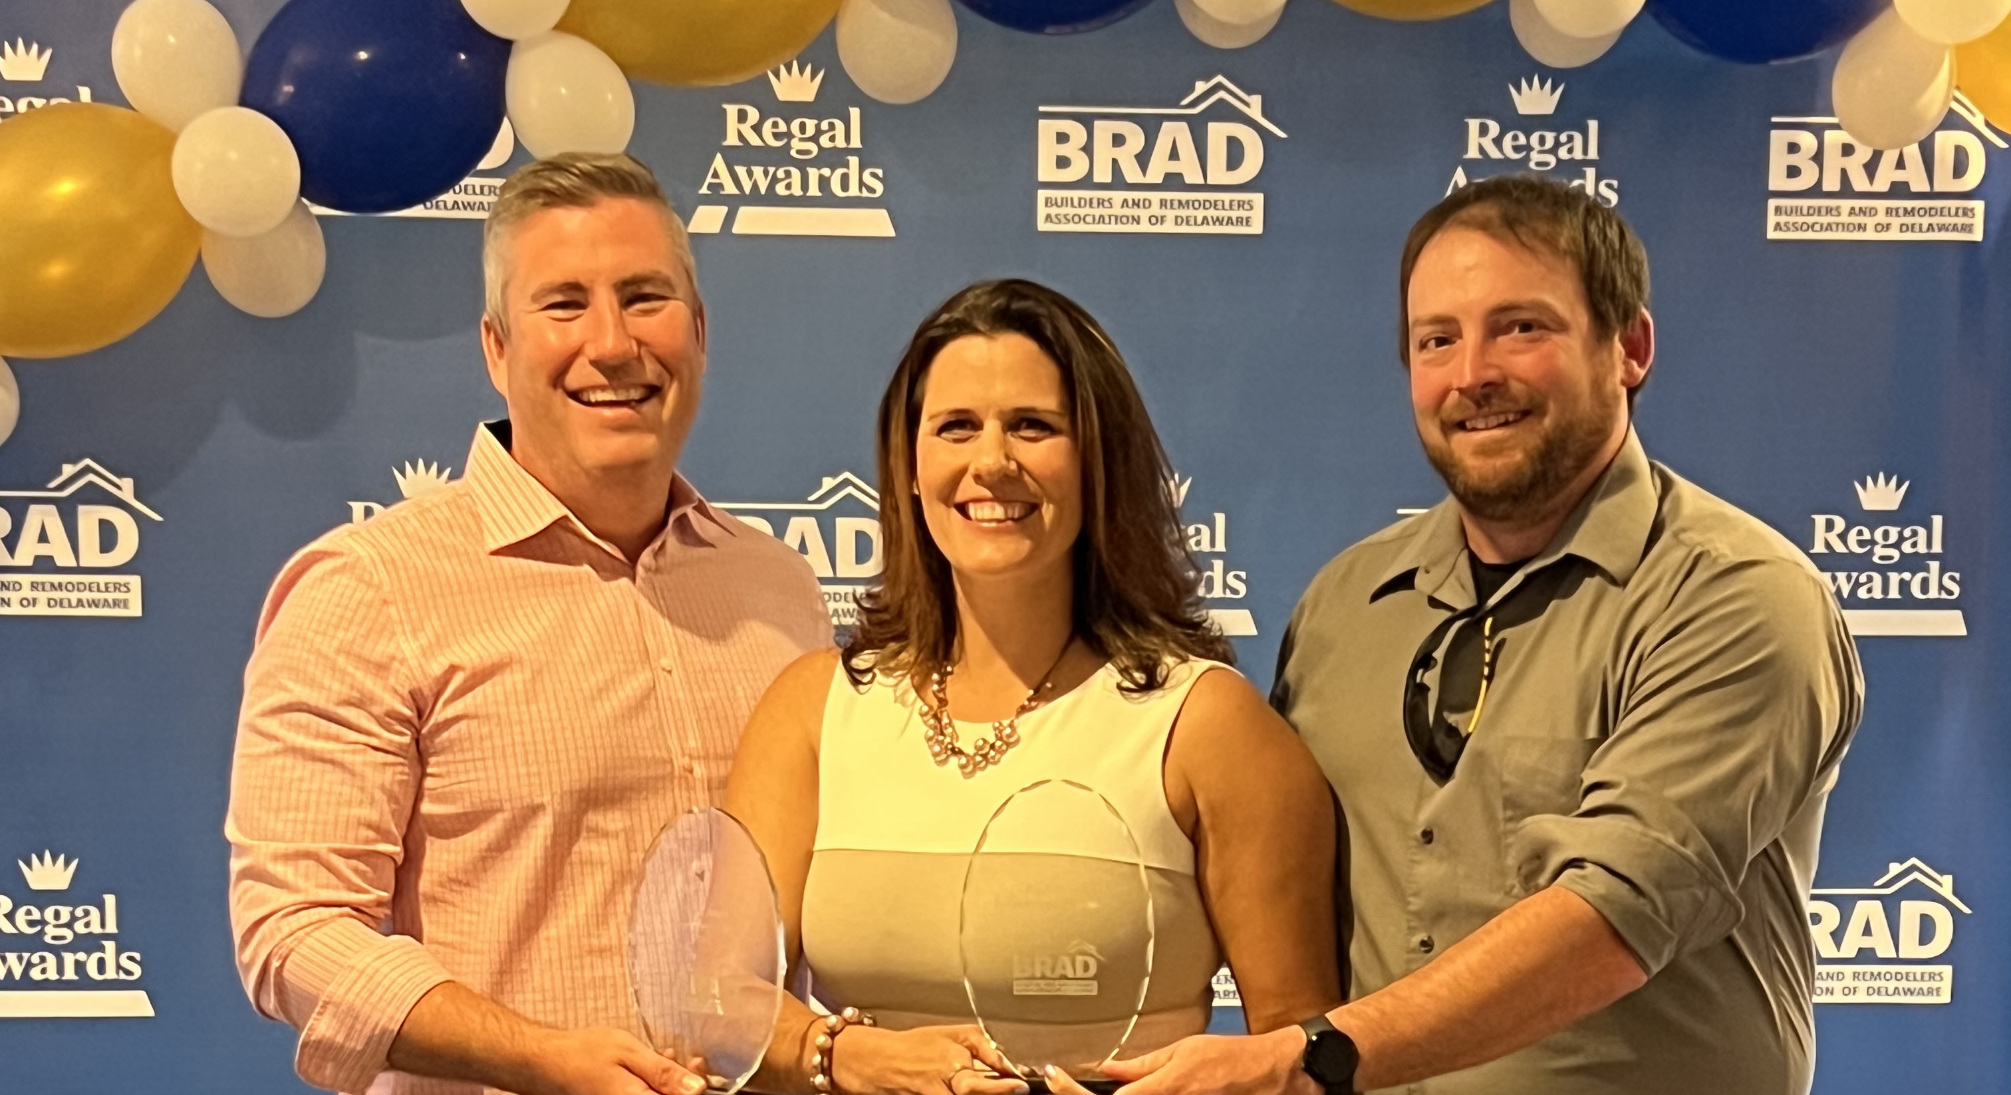 Adrian and Julleanna Seely, owners of Seely Homes in Bridgeville, and Nathaniel Maynard (right), site superintendent, accept two Regal Awards for Custom Homes from BRAD.